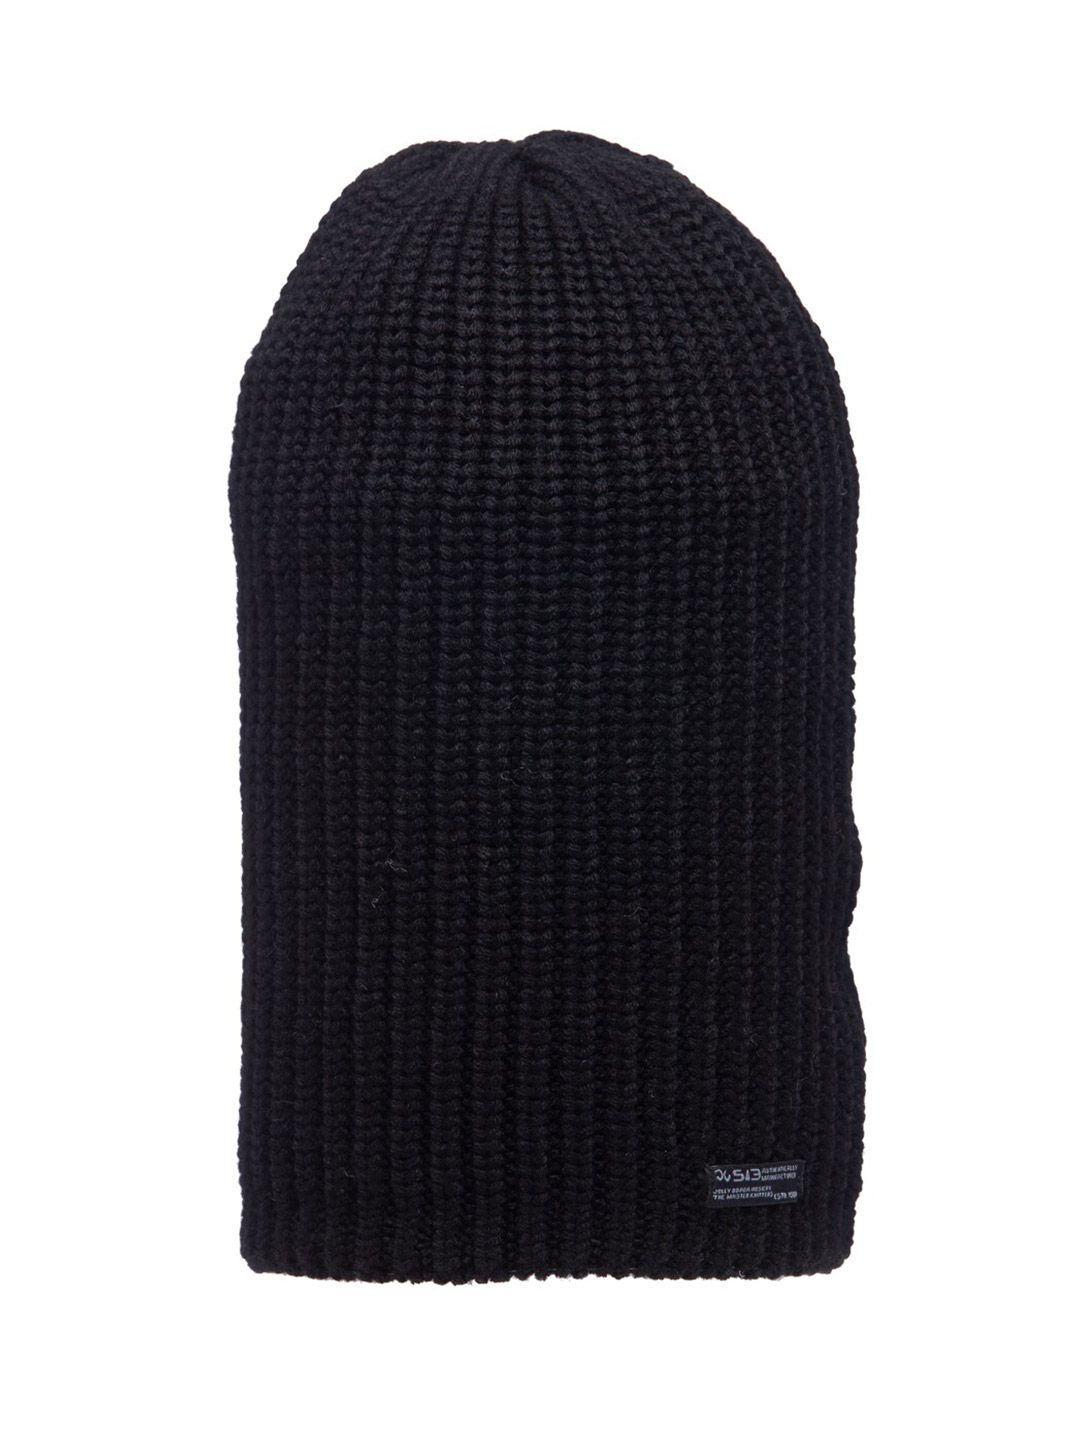 513 Women Black Knitted Beanie Price in India